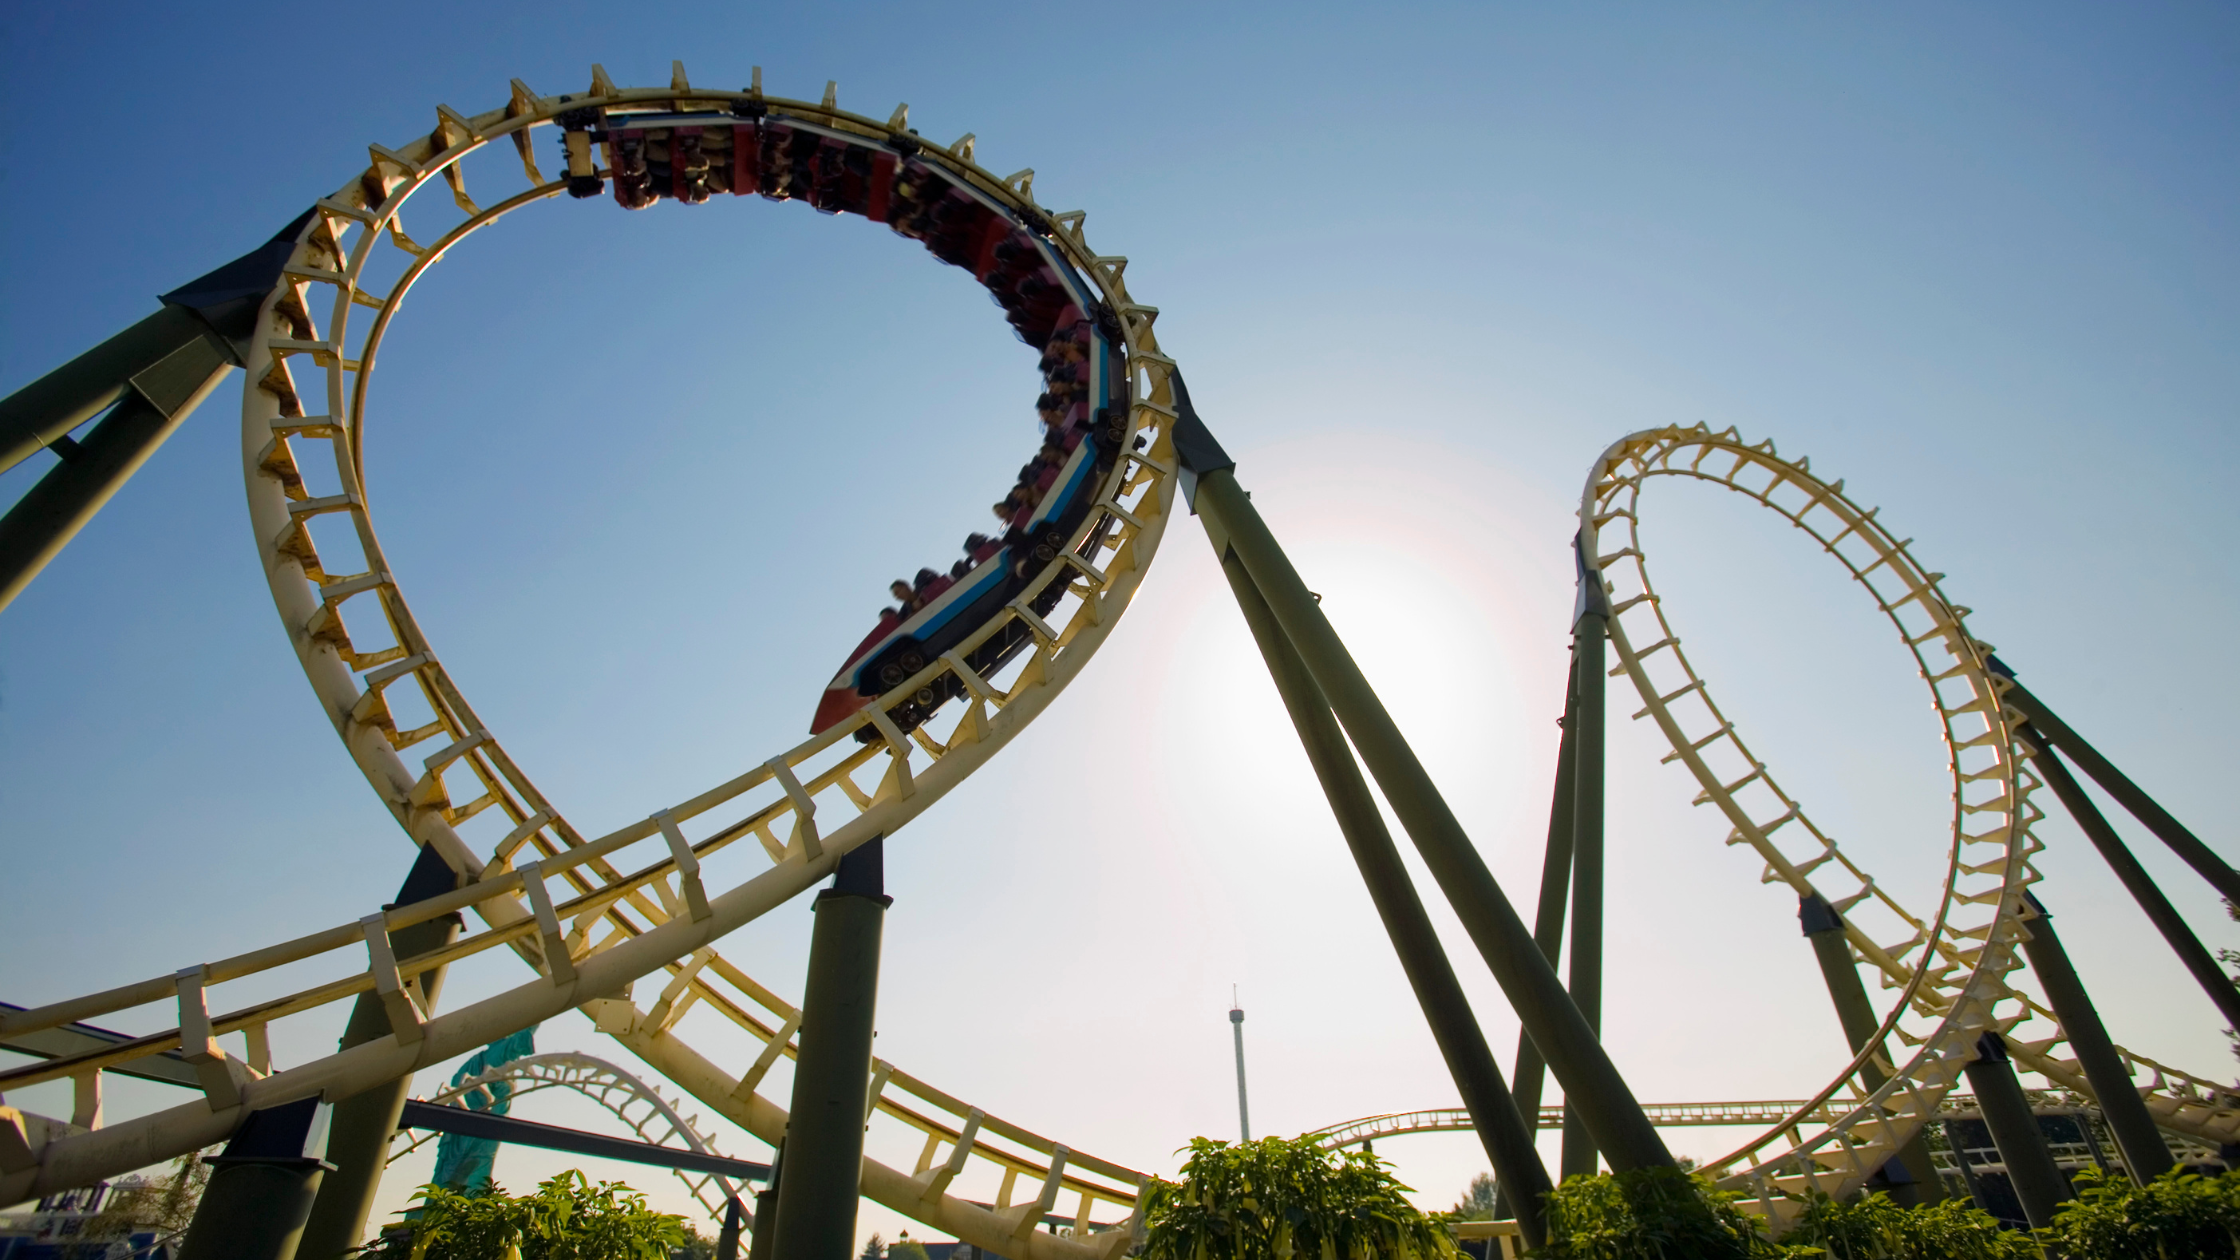 The Ins and Outs (and Ups and Downs) of Roller Coaster Engineering